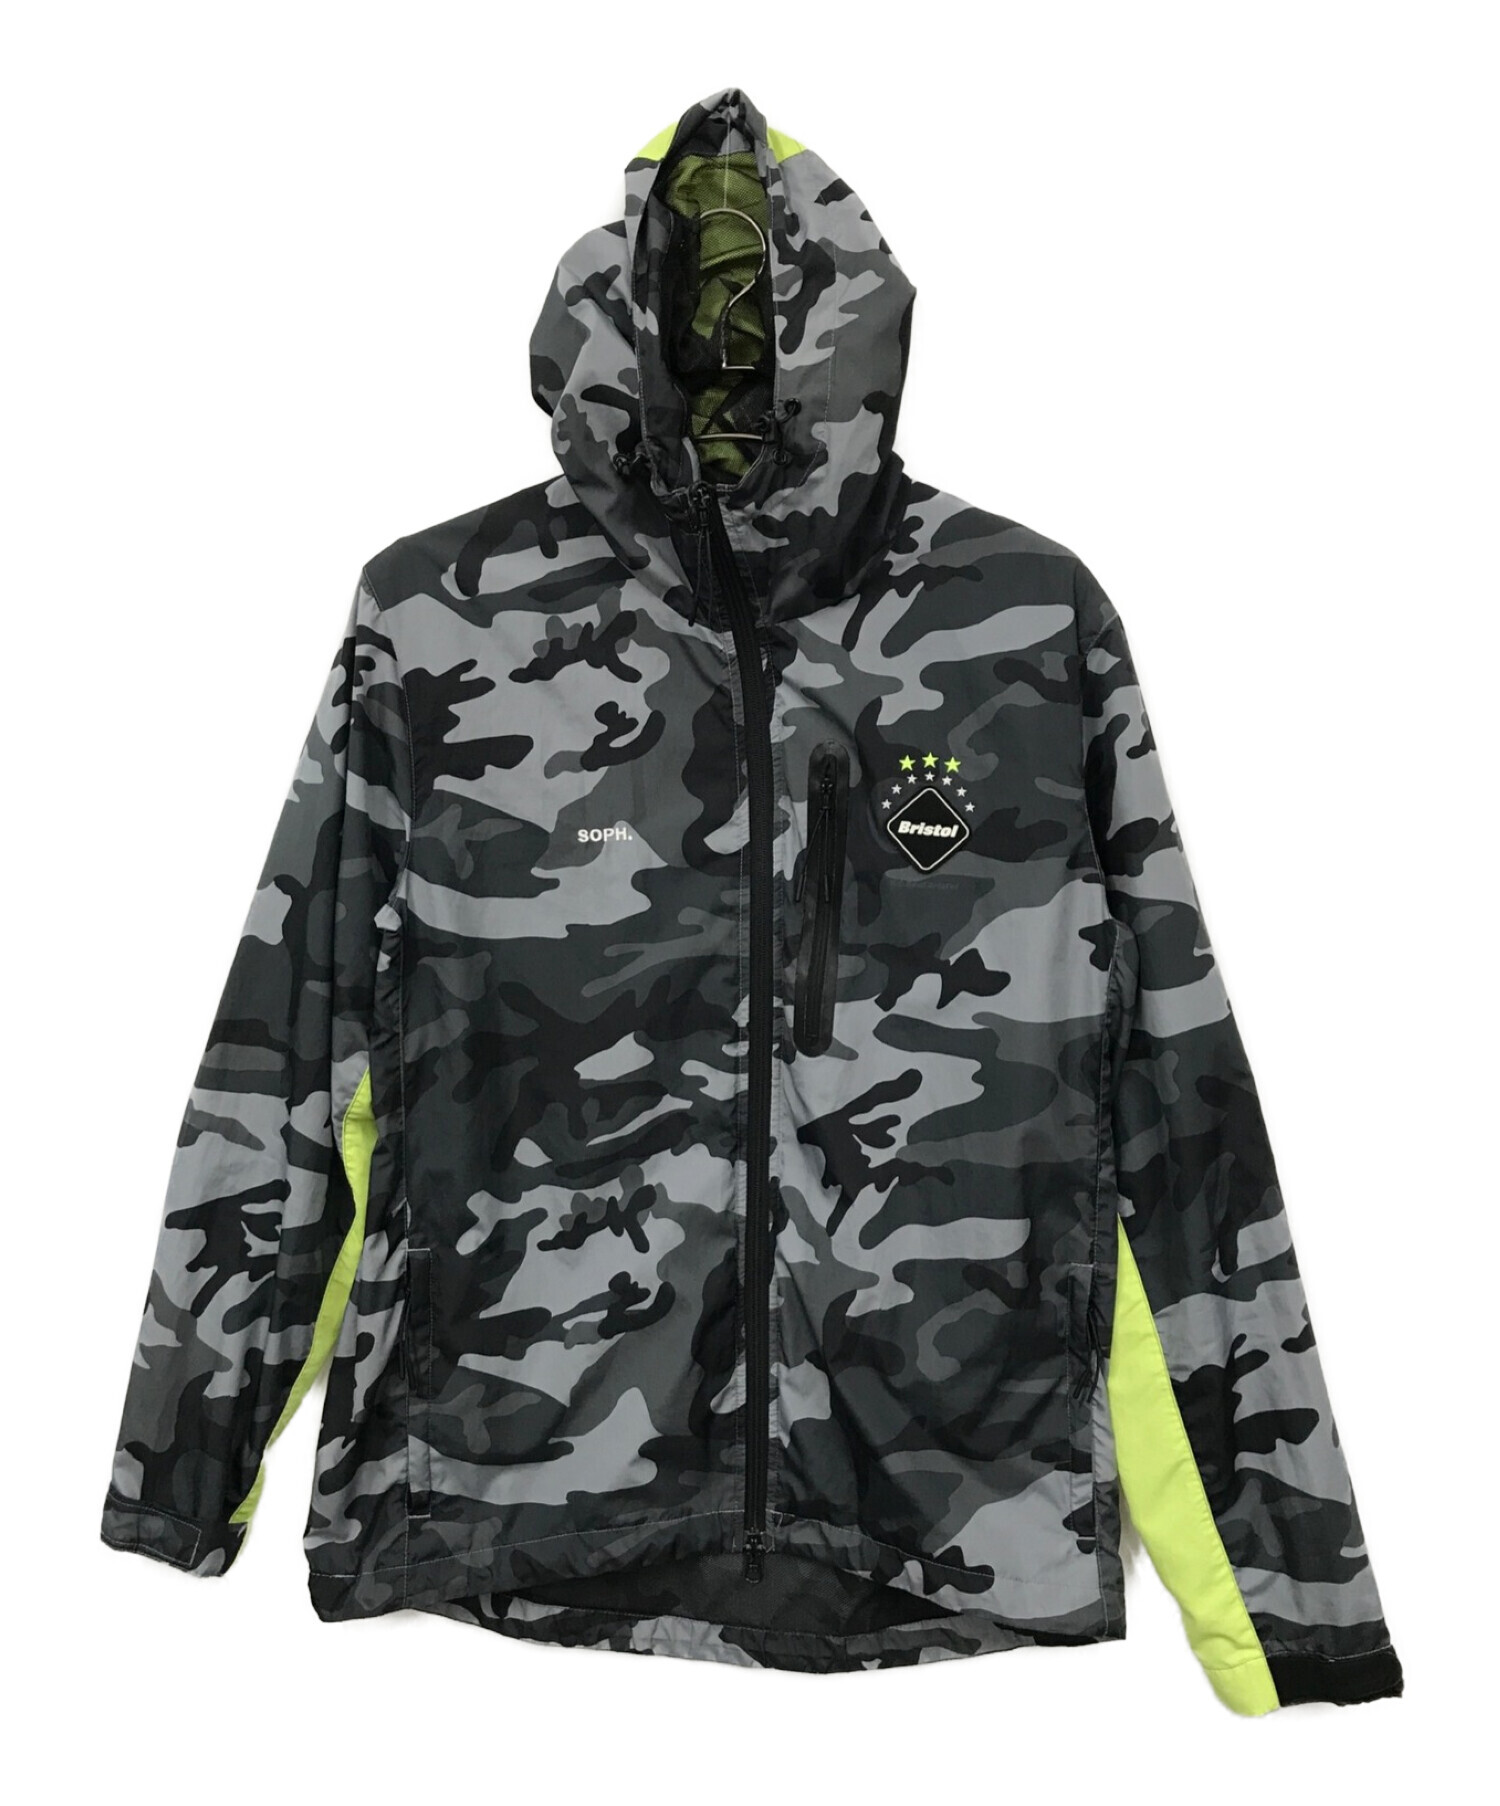 FCRB CAMOUFLAGE PRACTICE JACKET プラクティス他にもsup - www.avancia.ee